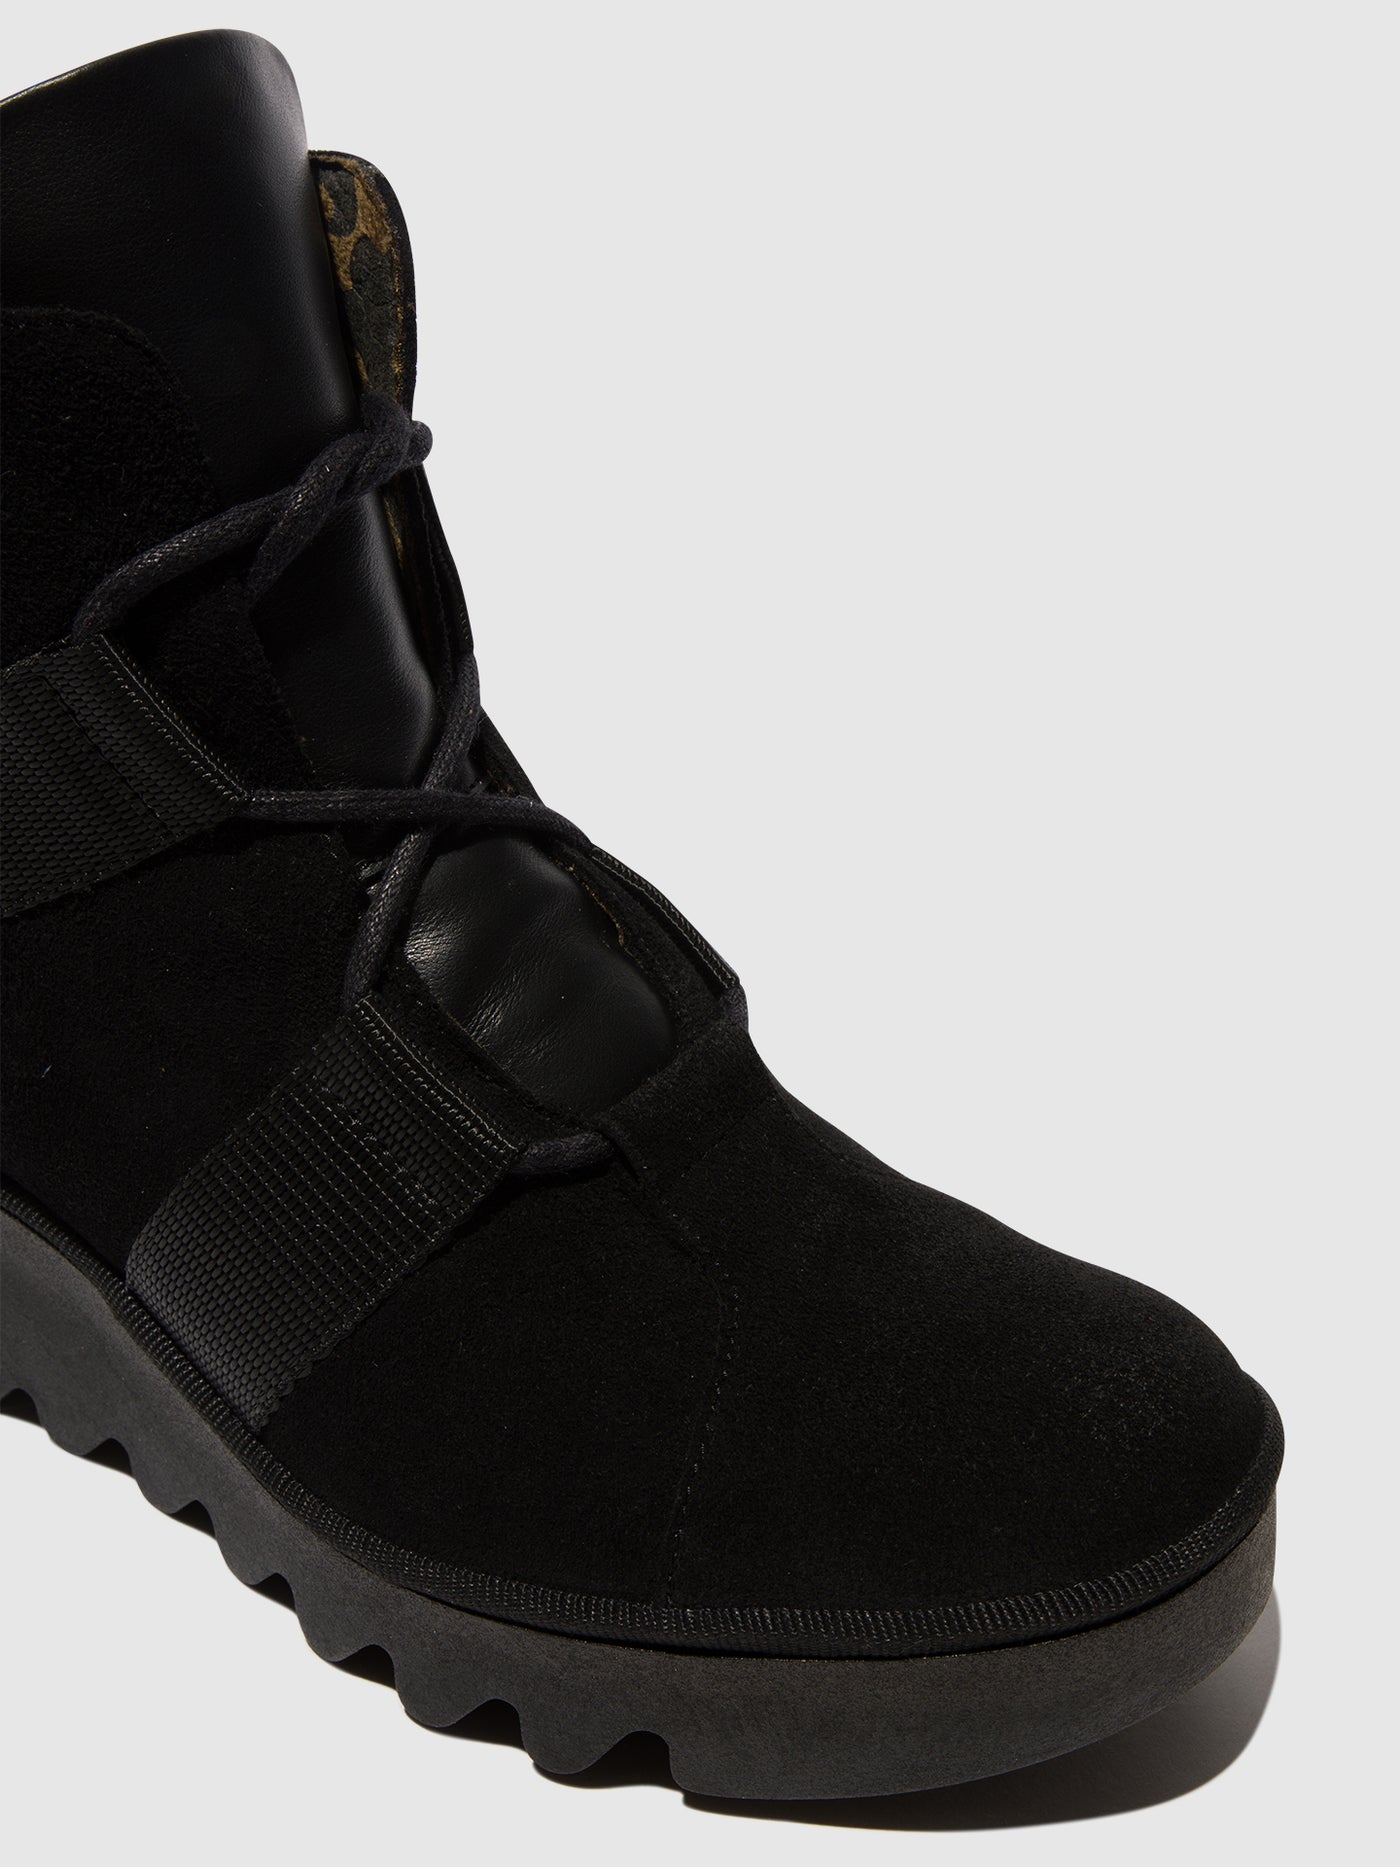 Lace-up Ankle Boots BLOM460FLY BLACK